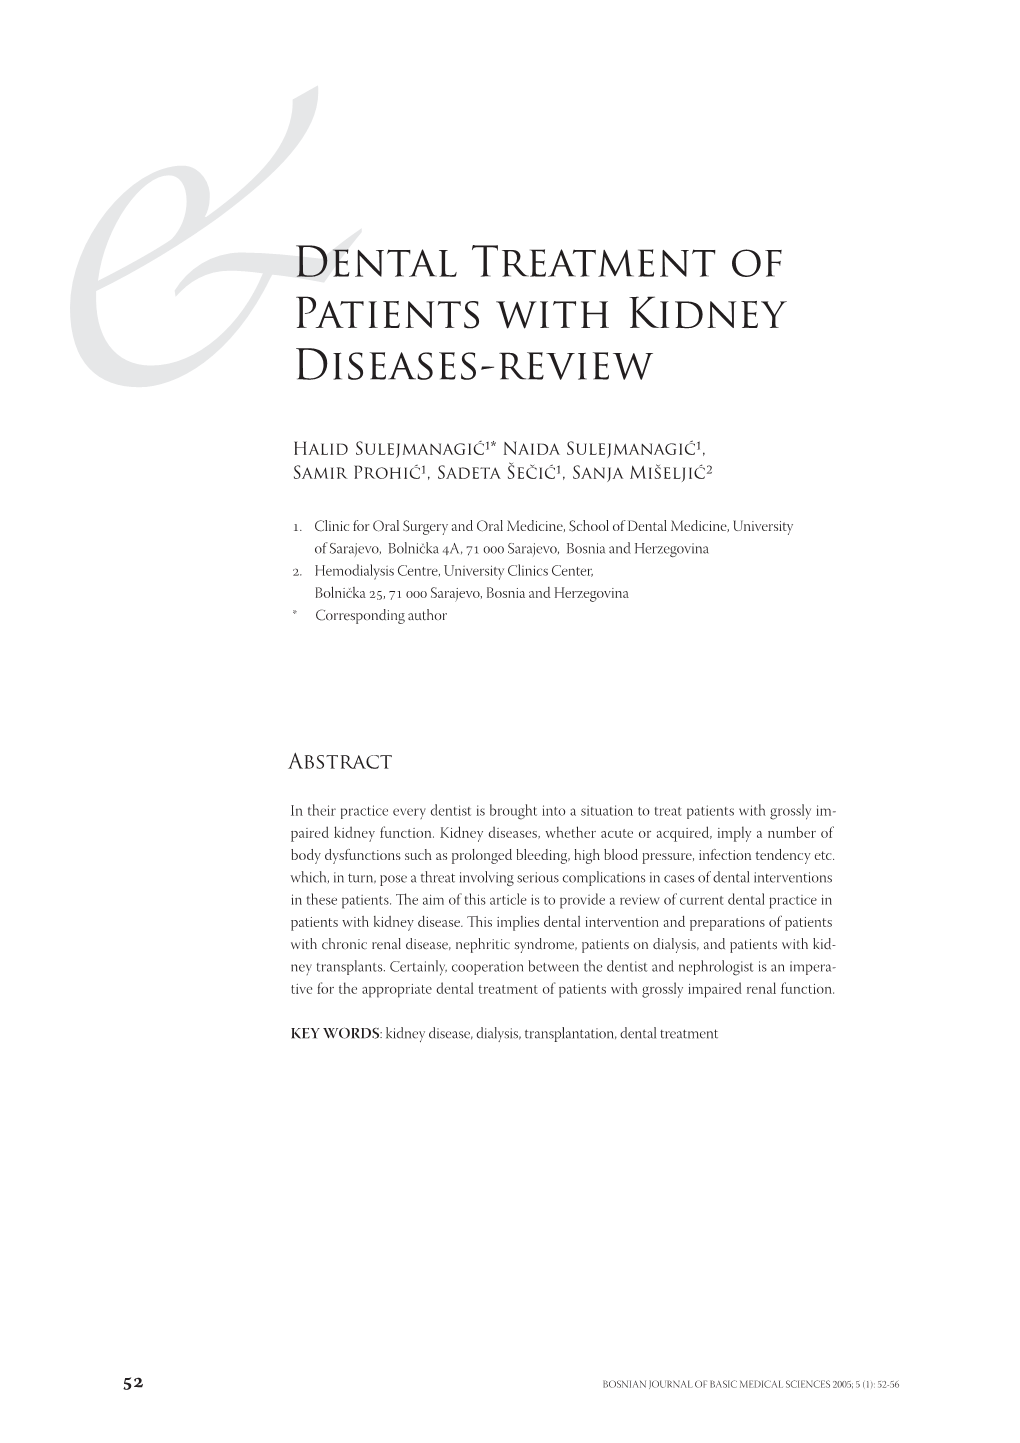 Dental Treatment of Patients with Kidney Diseases-Review